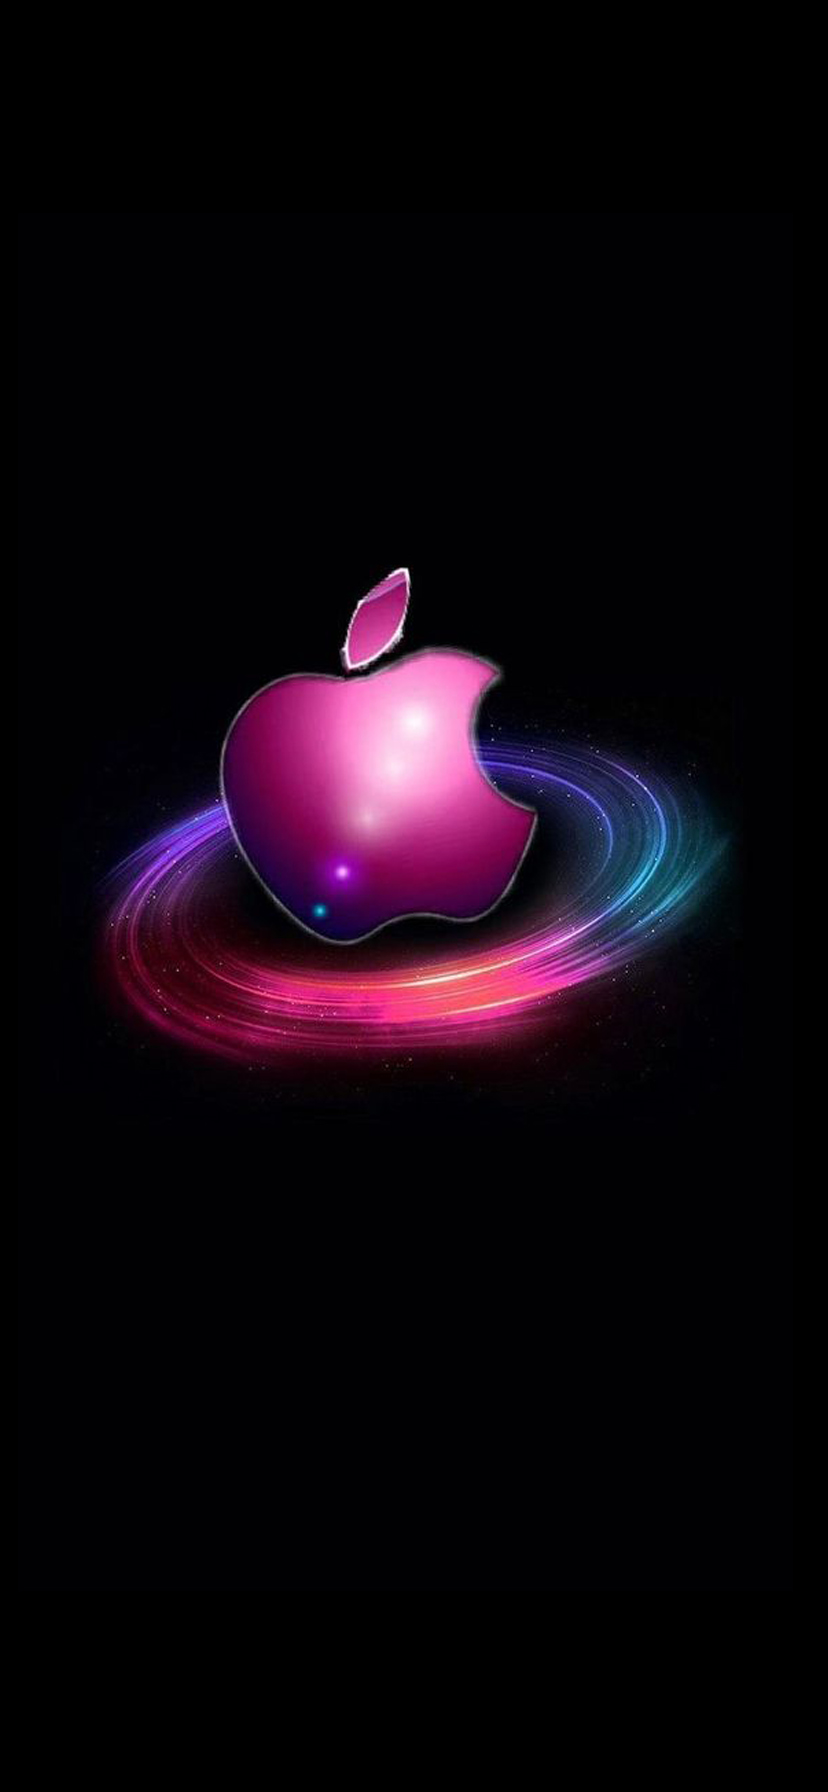 Alternative Wallpaper for Apple iPhone 11 Background and Colorful Logo Wallpaper. Wallpaper Download. High Resolution Wallpaper